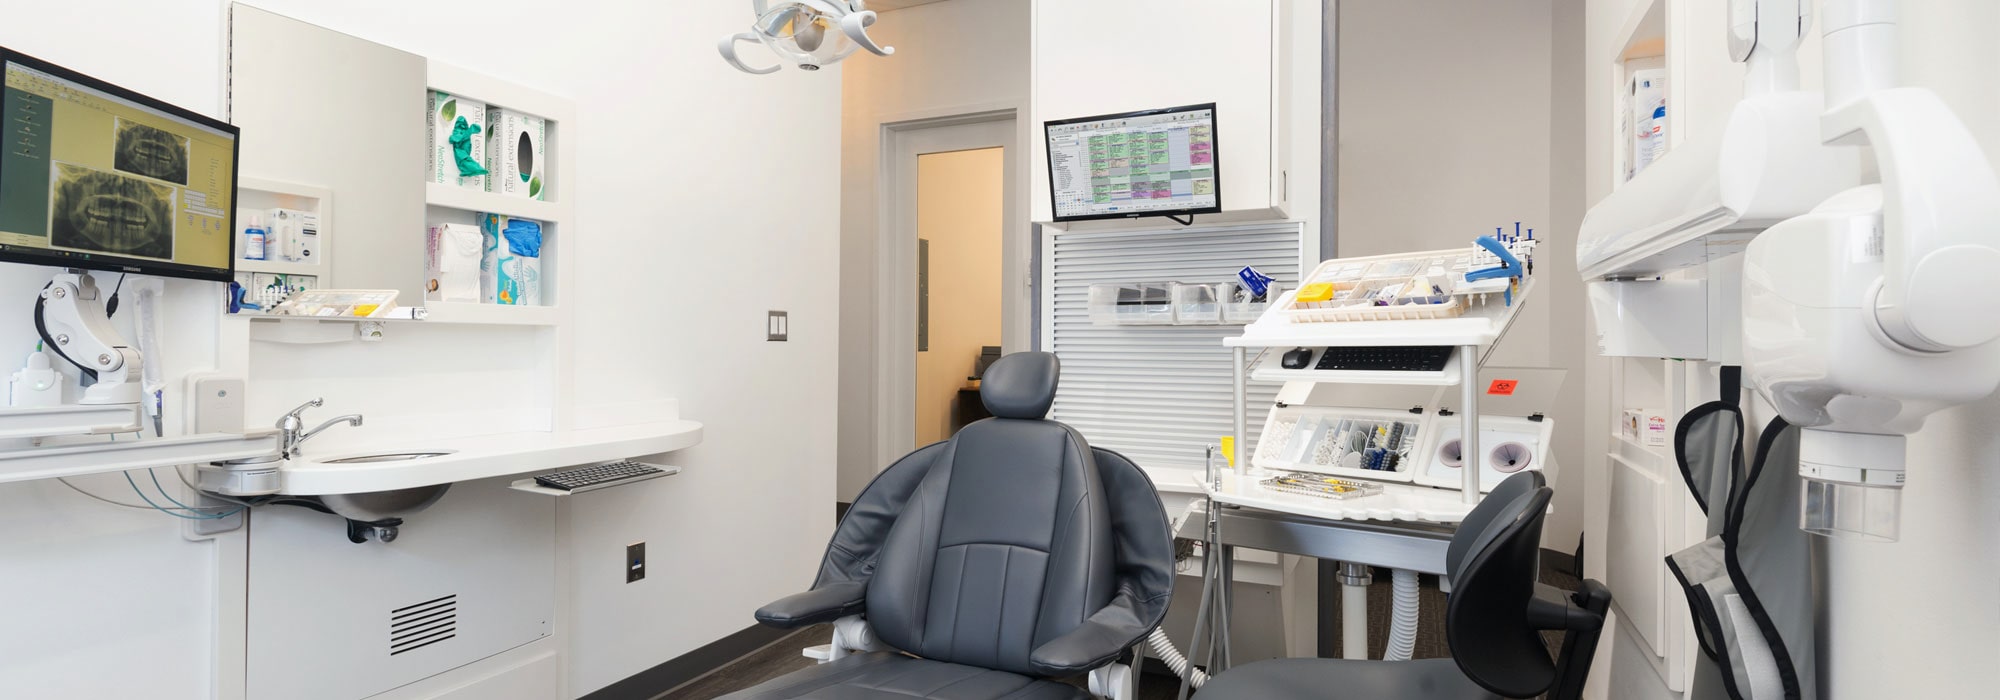 Dr. Billings and Dr. Soistman Dental Practice Treatment room